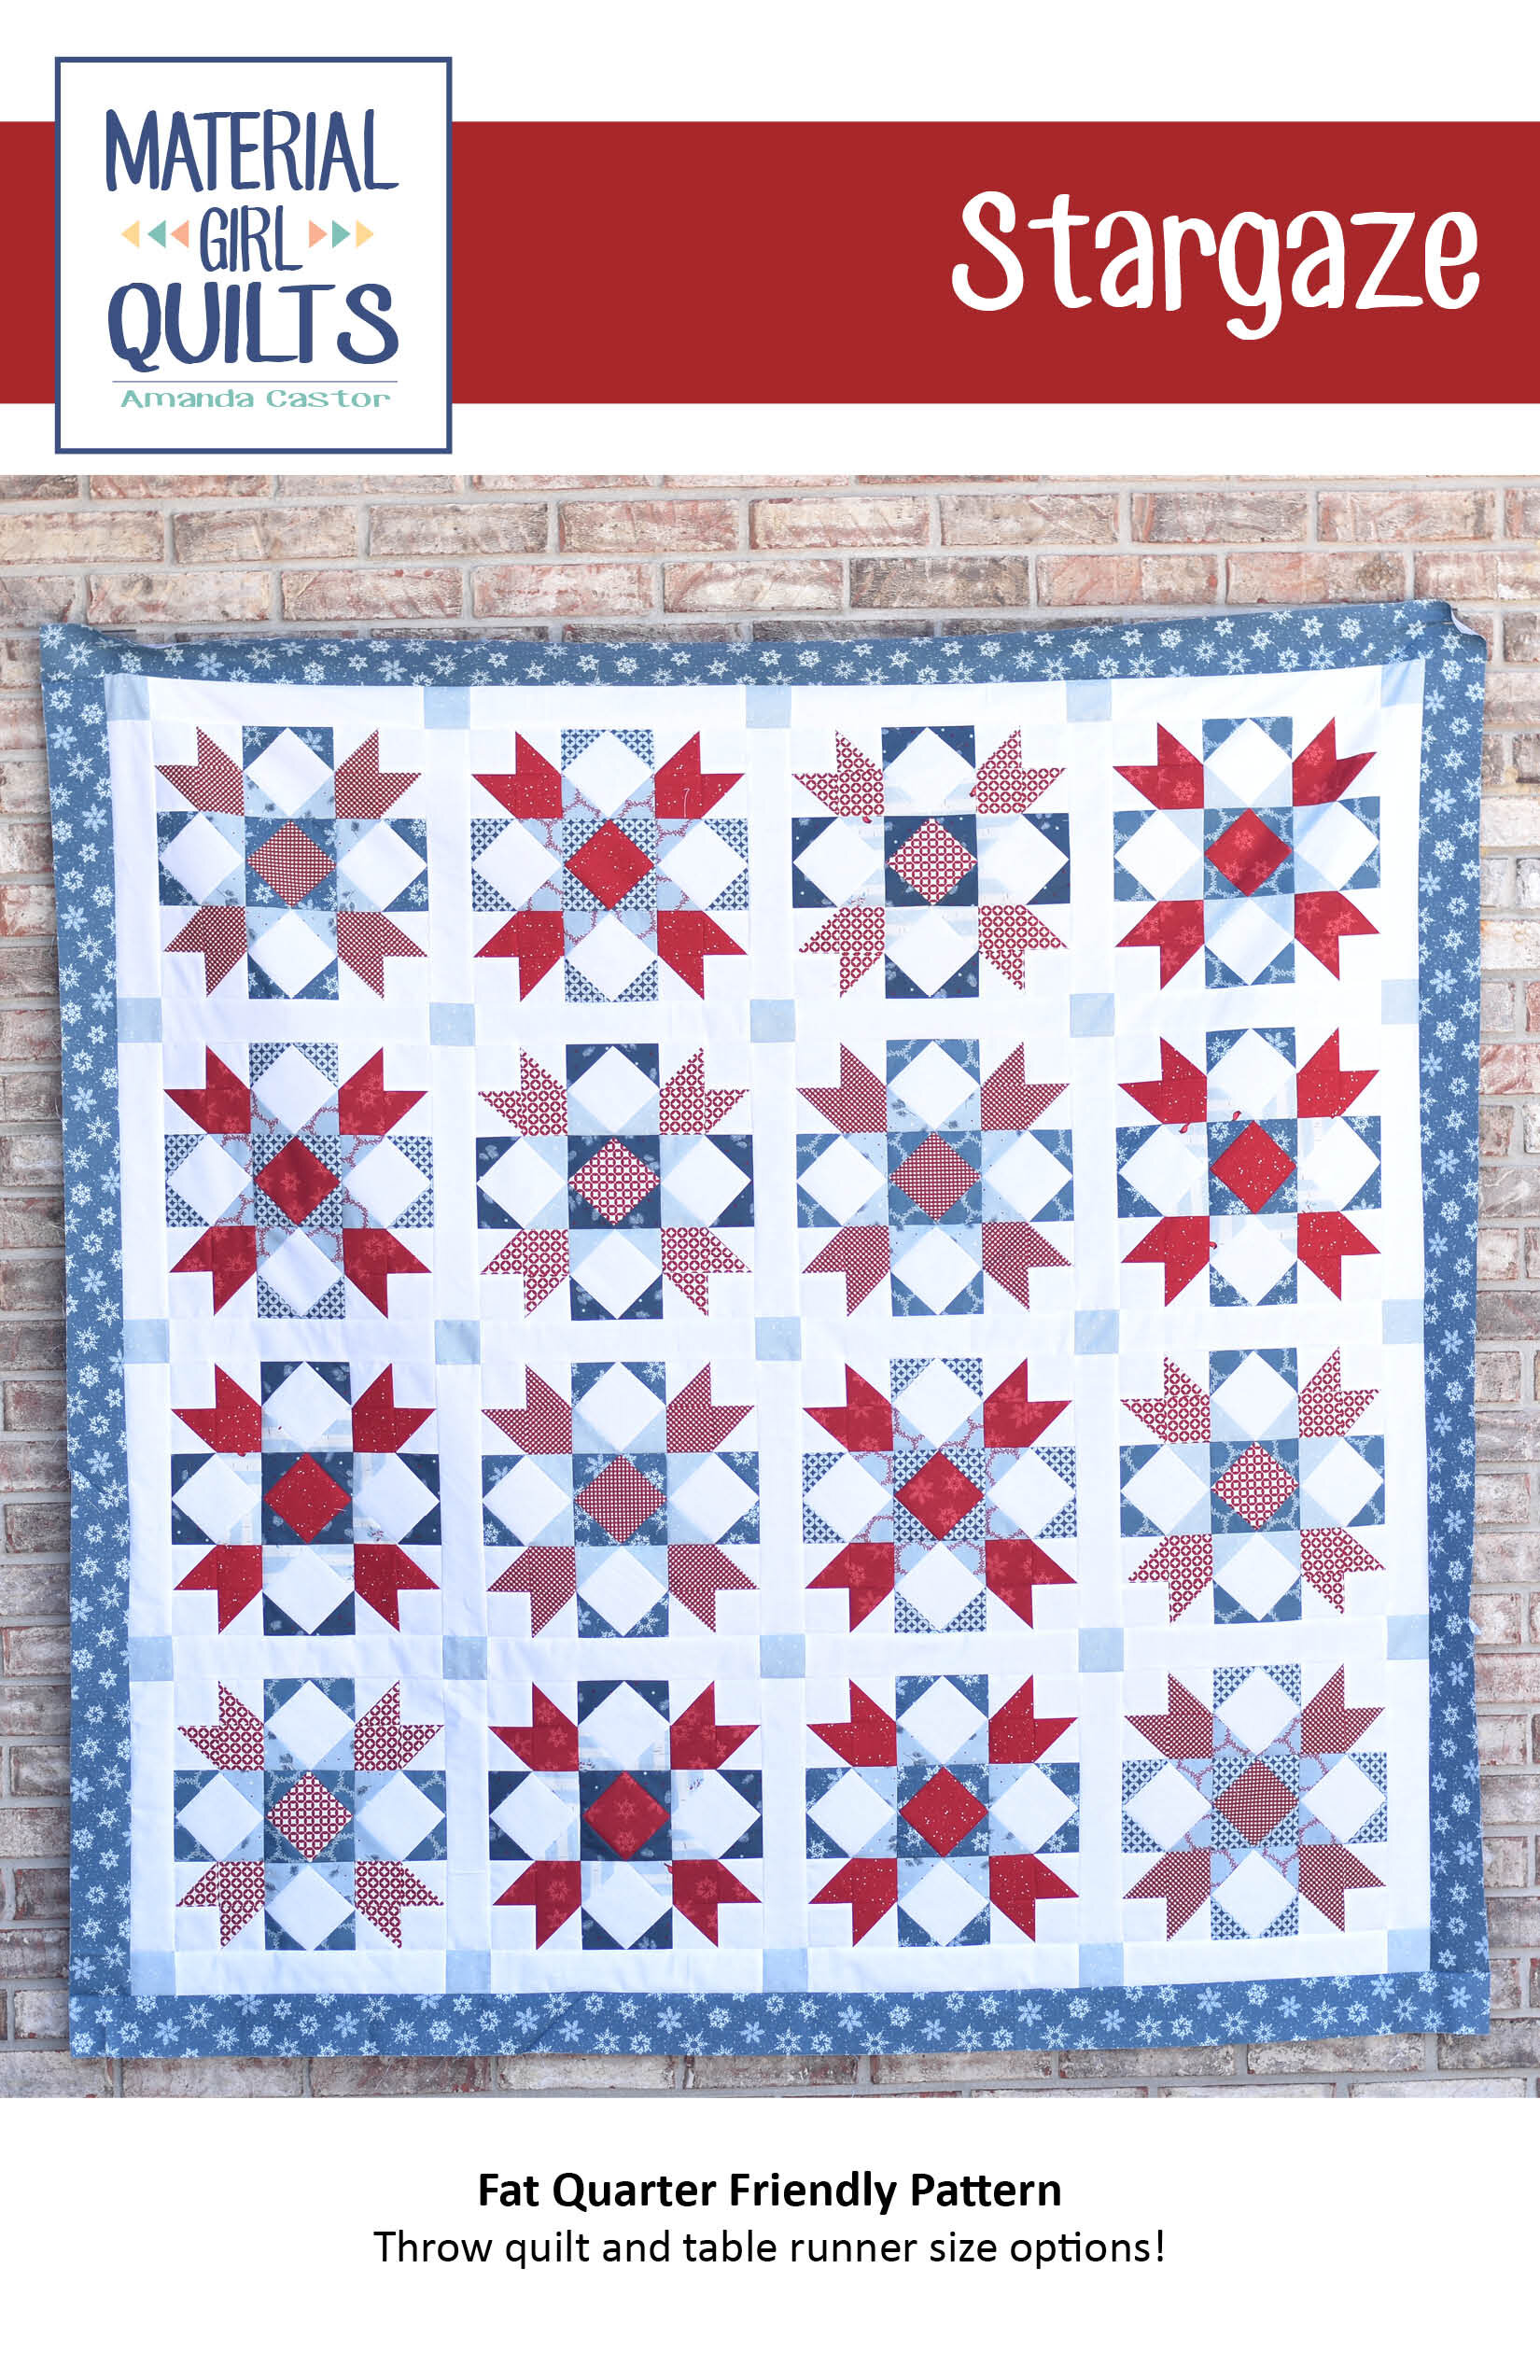 Material Girl Quilts — Shop